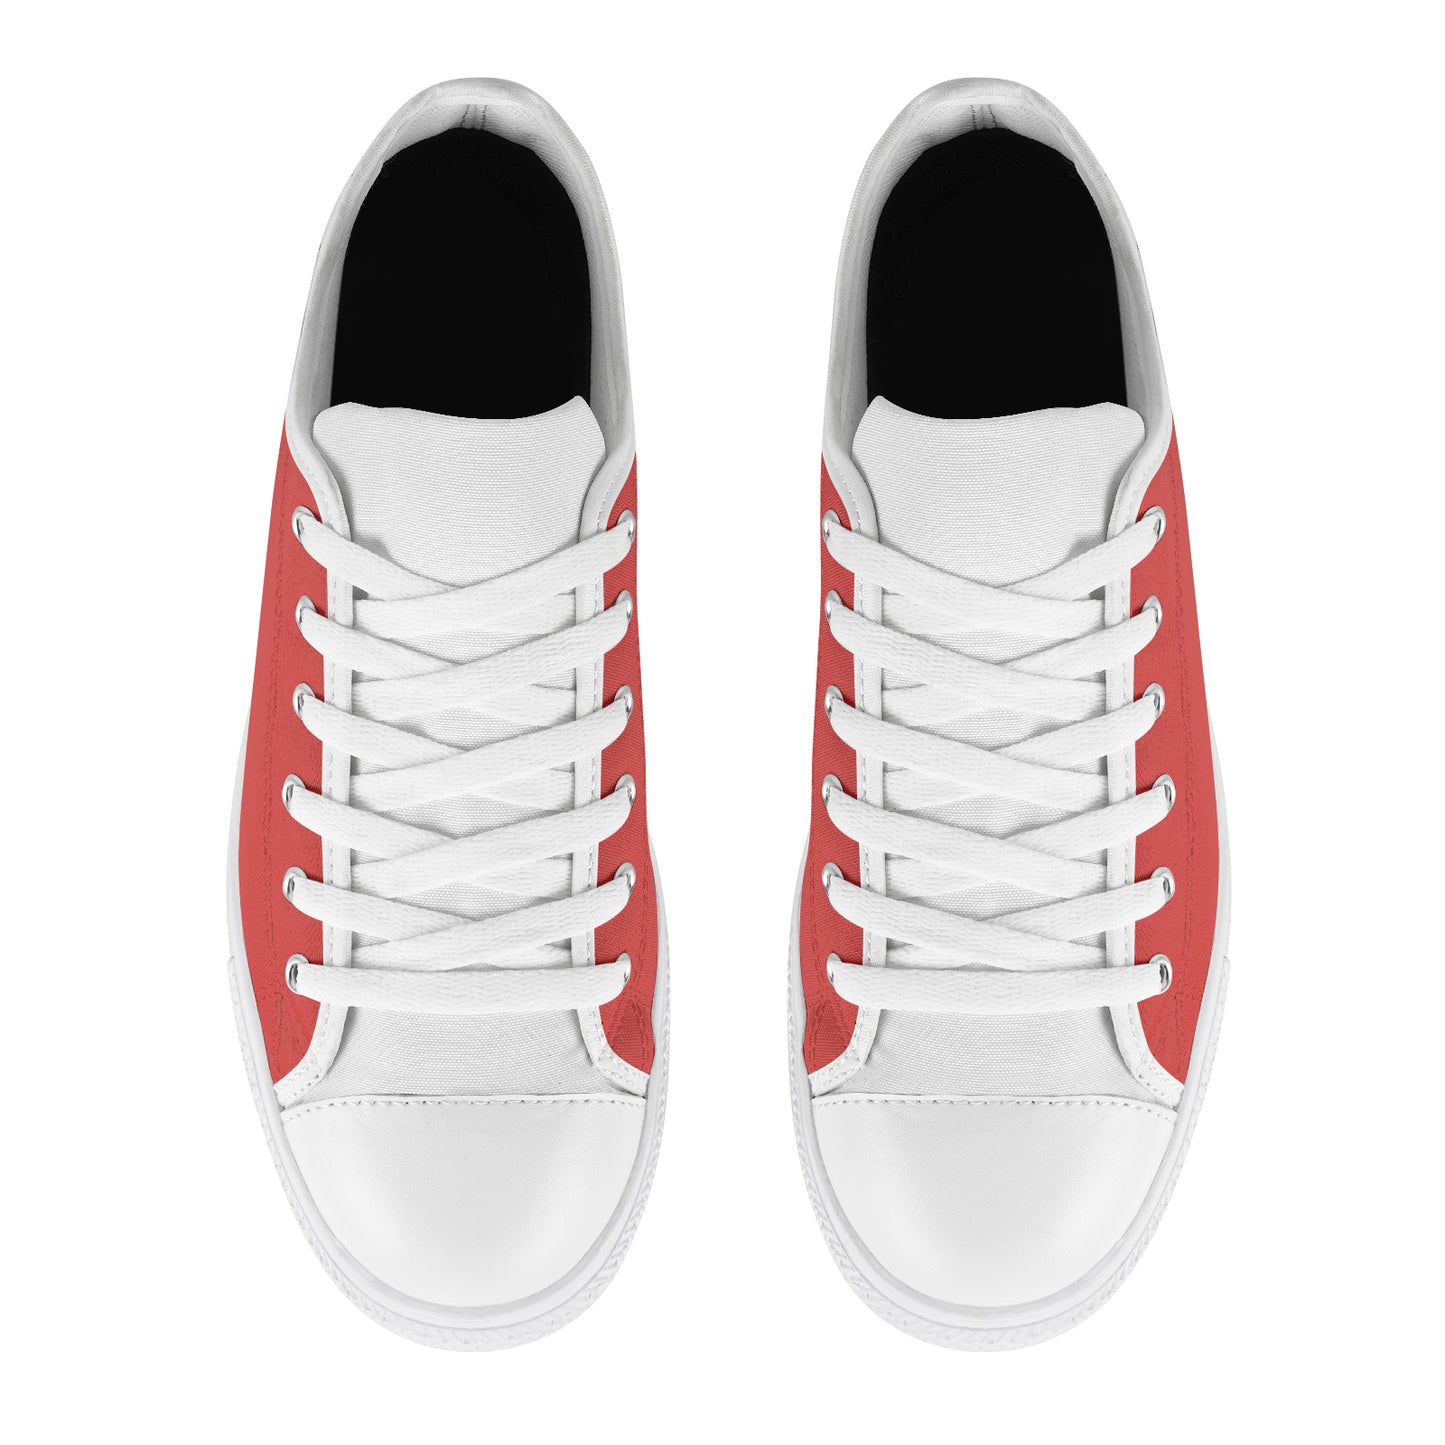 Women's Canvas Sneakers - Classic Red